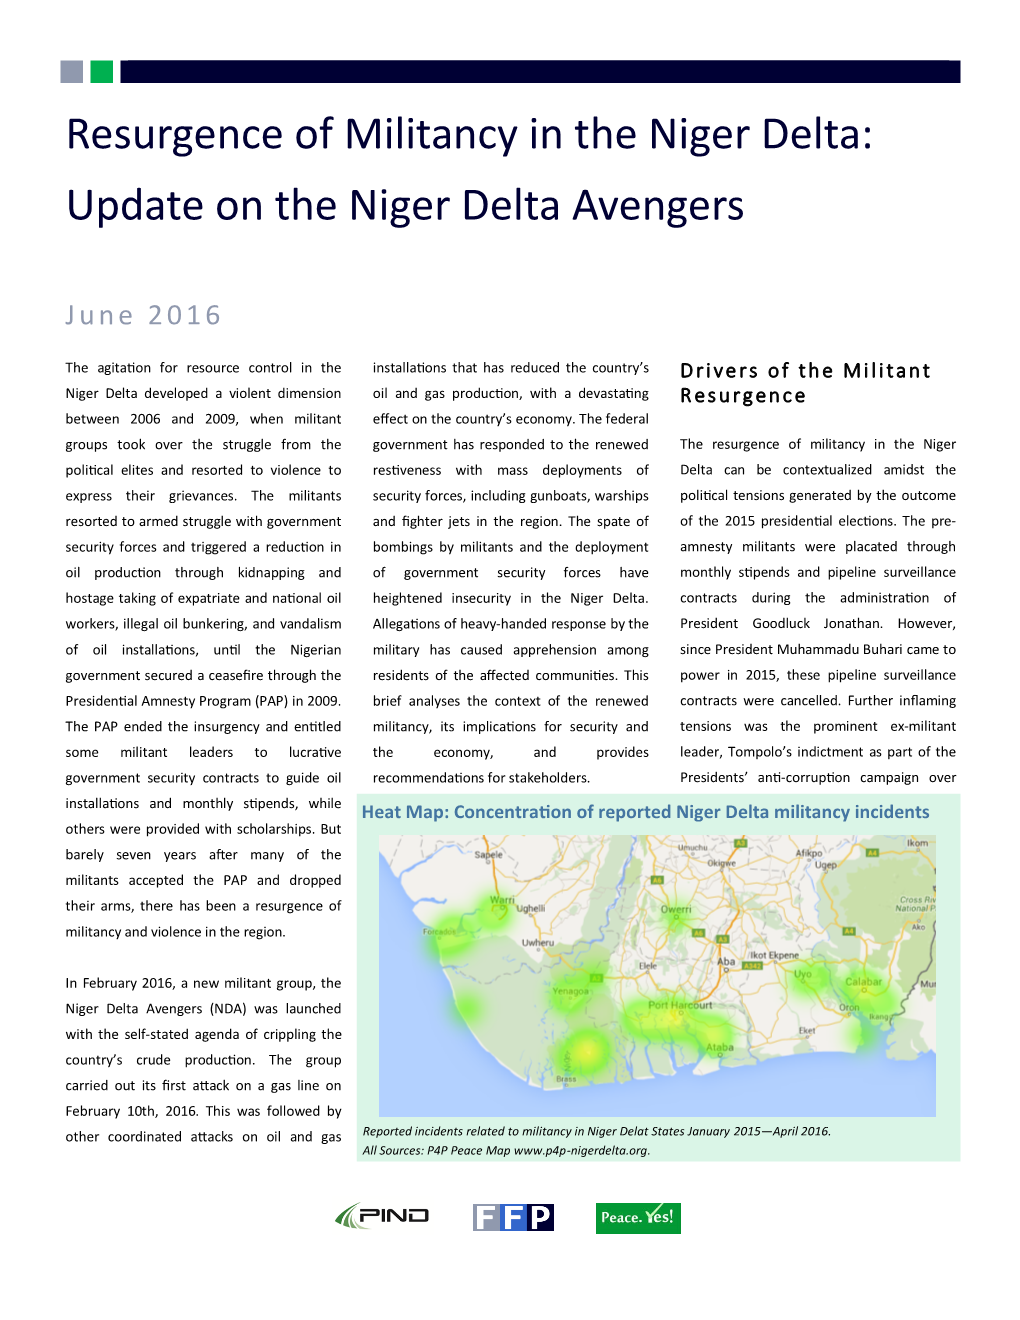 Update on the Niger Delta Avengers